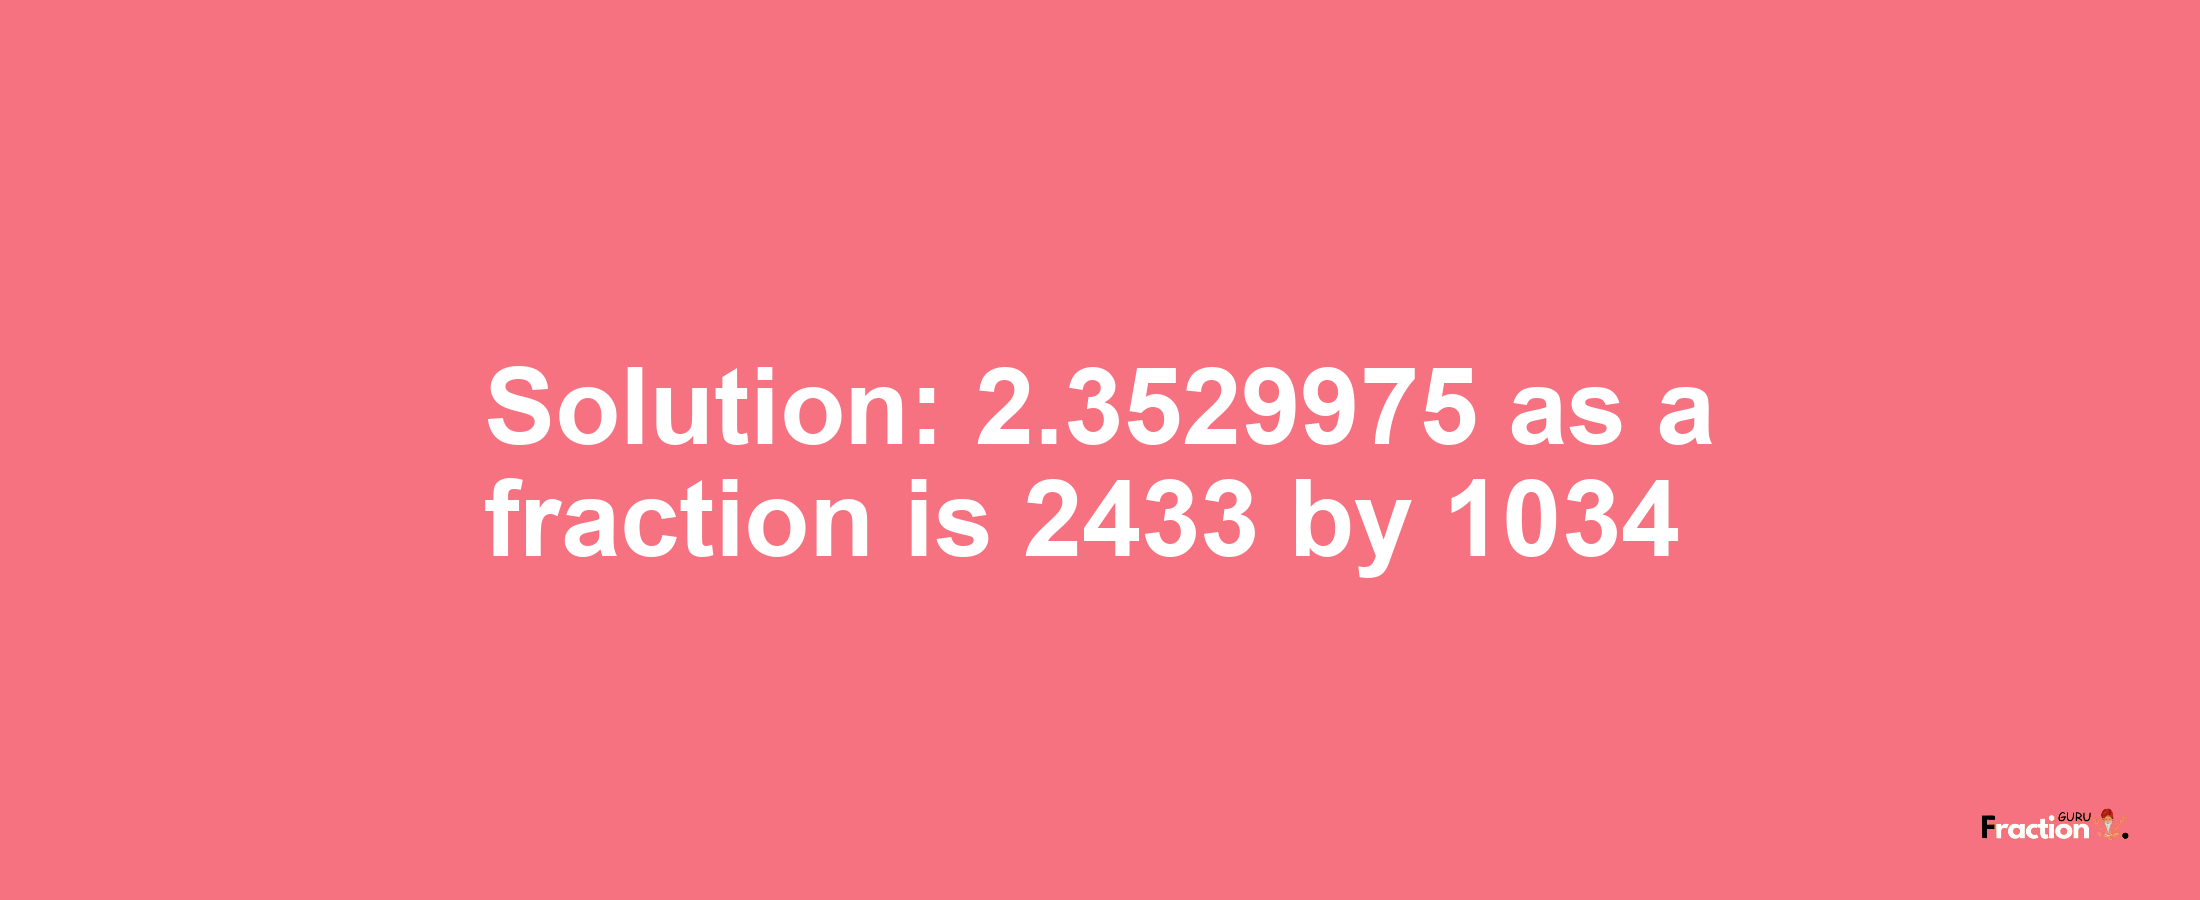 Solution:2.3529975 as a fraction is 2433/1034